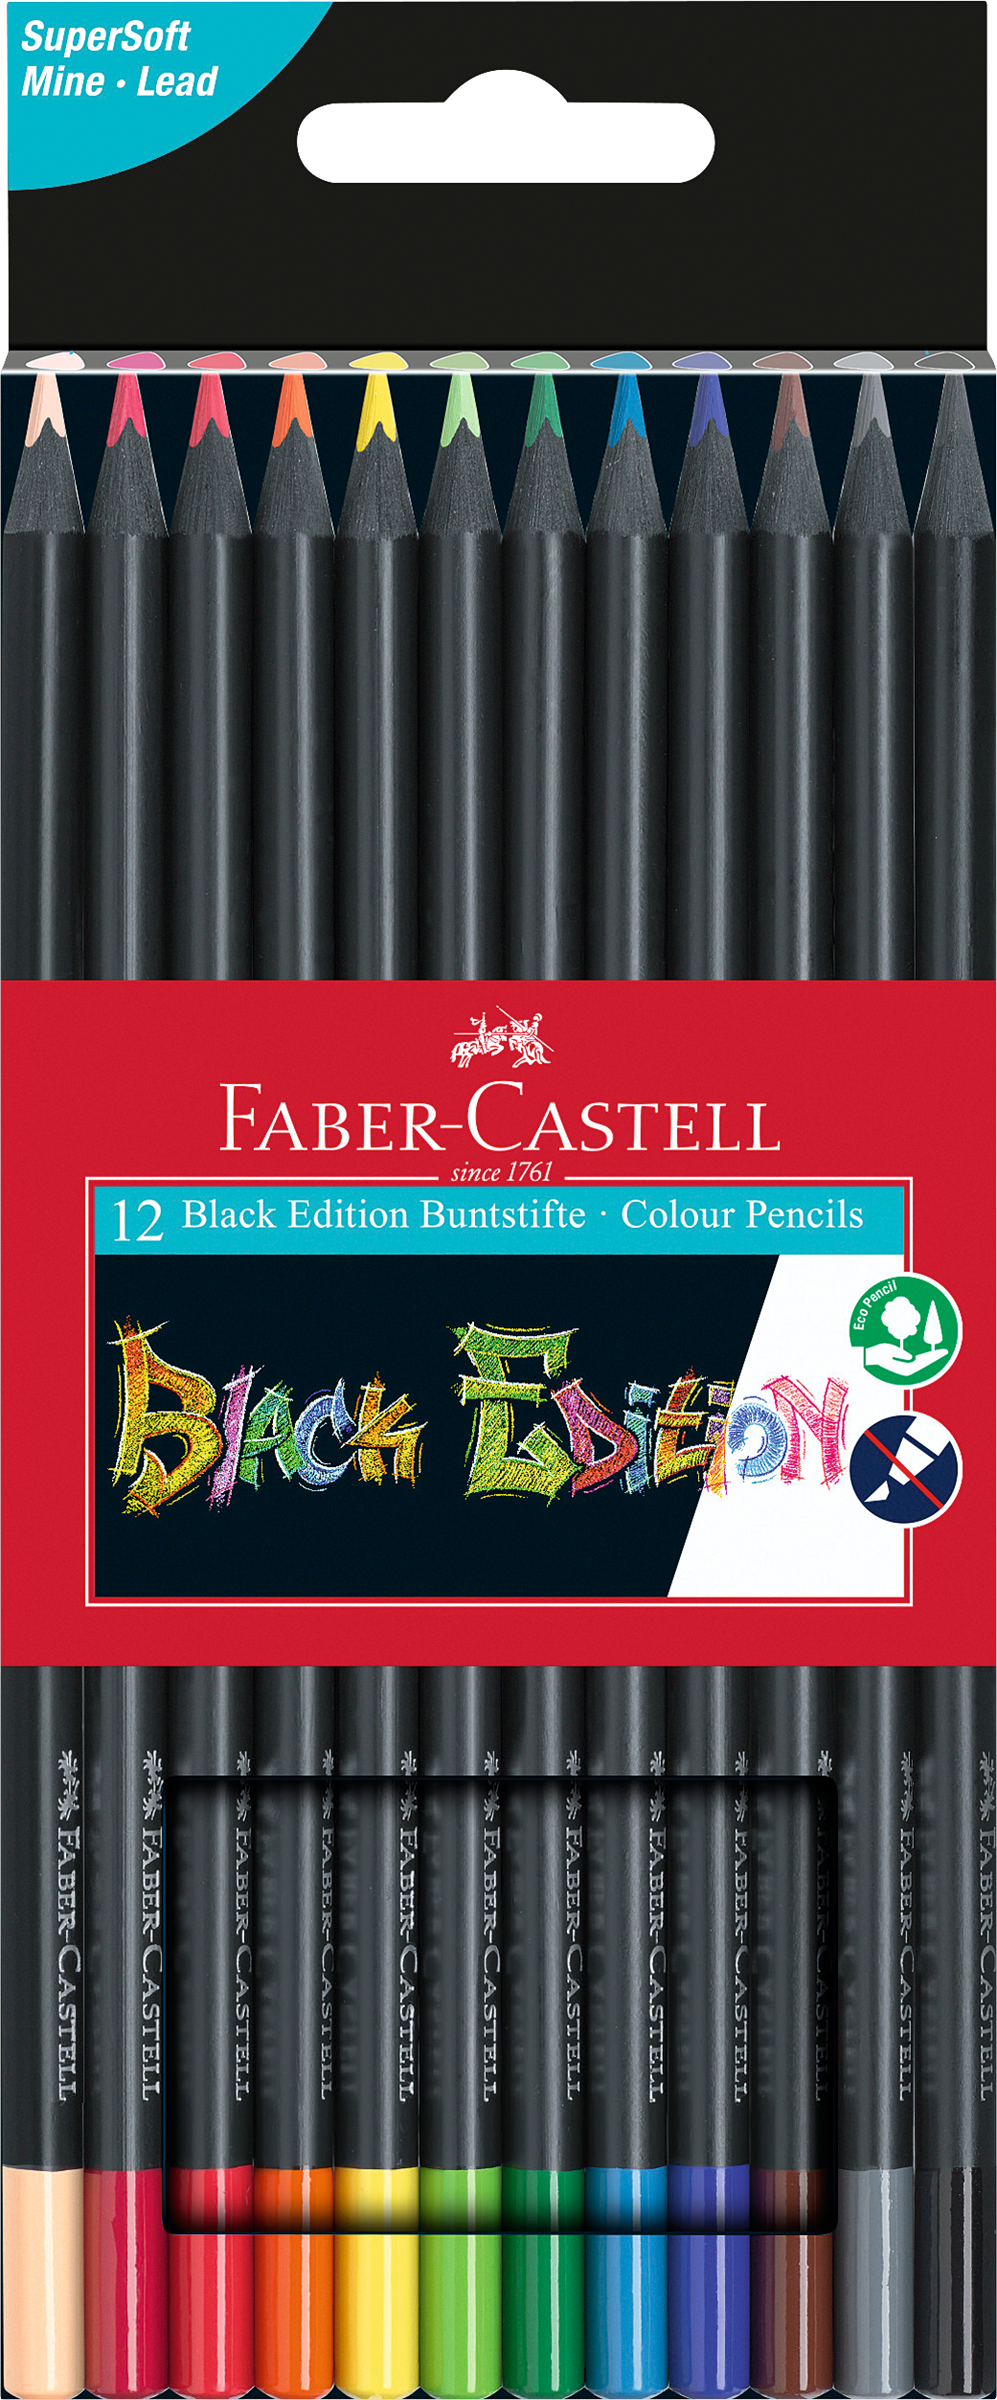 PAGRO DISKONT_PA_Faber Castell_Black Edition